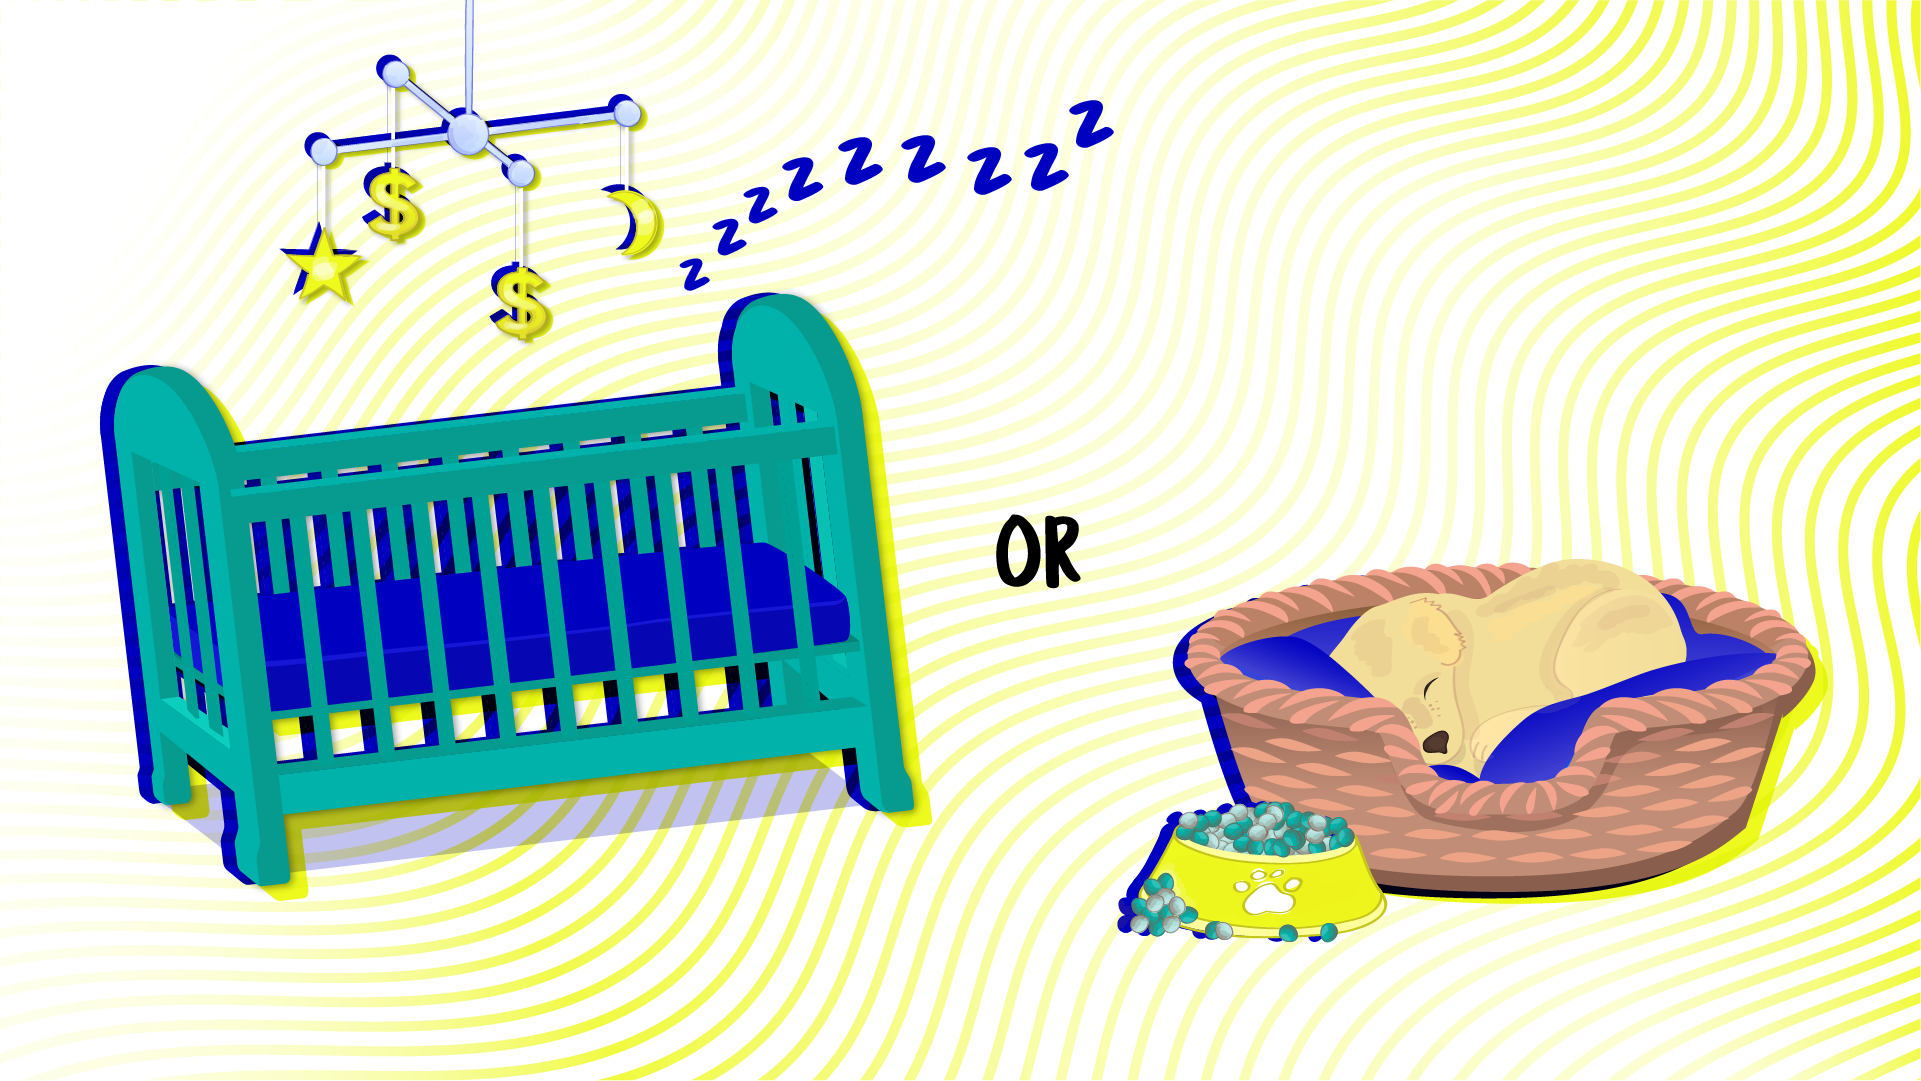 Baby crib or puppy sleeping_when two becomes three or four article